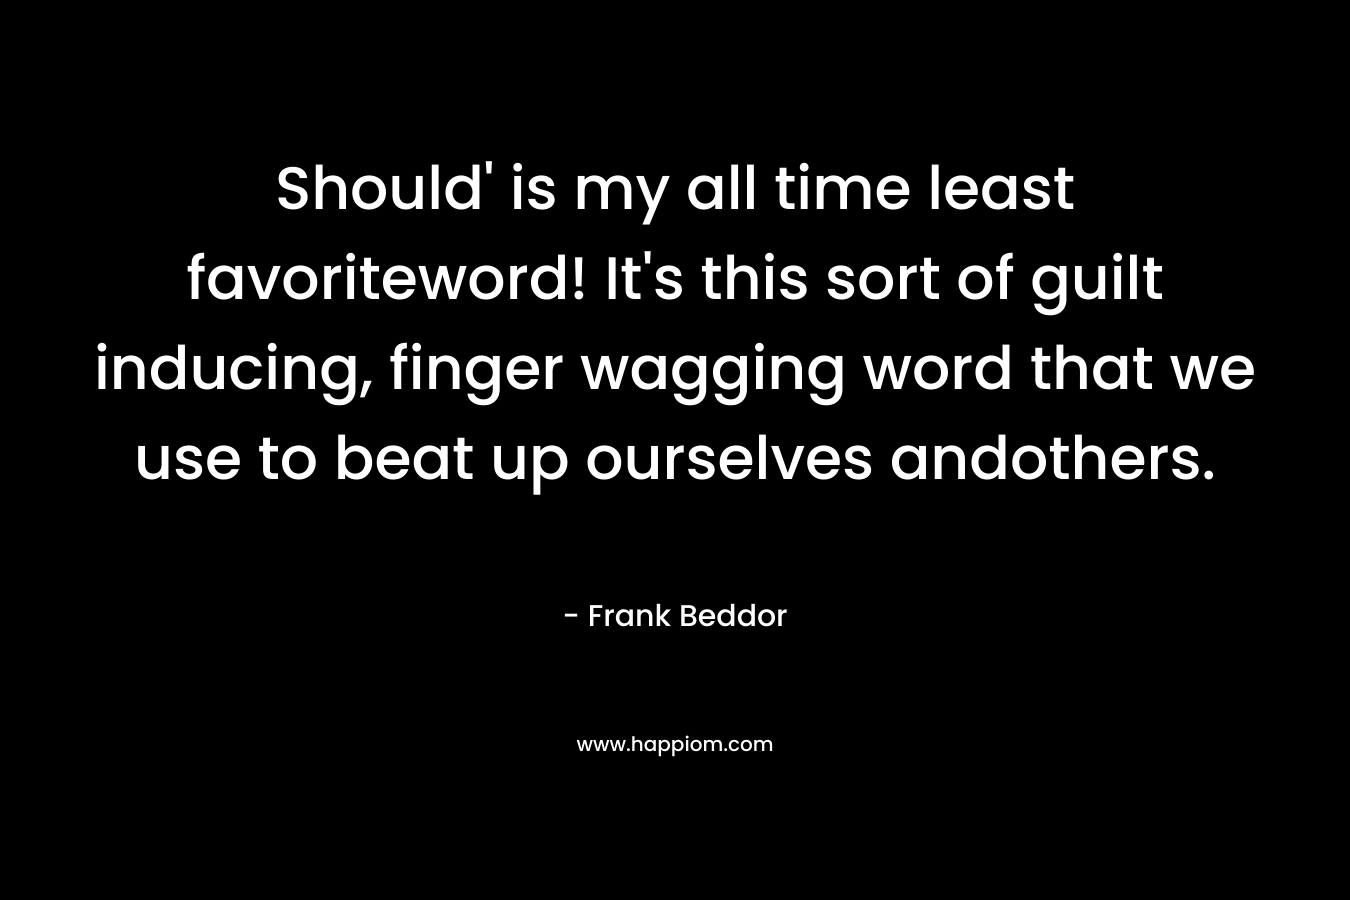 Should’ is my all time least favoriteword! It’s this sort of guilt inducing, finger wagging word that we use to beat up ourselves andothers. – Frank Beddor